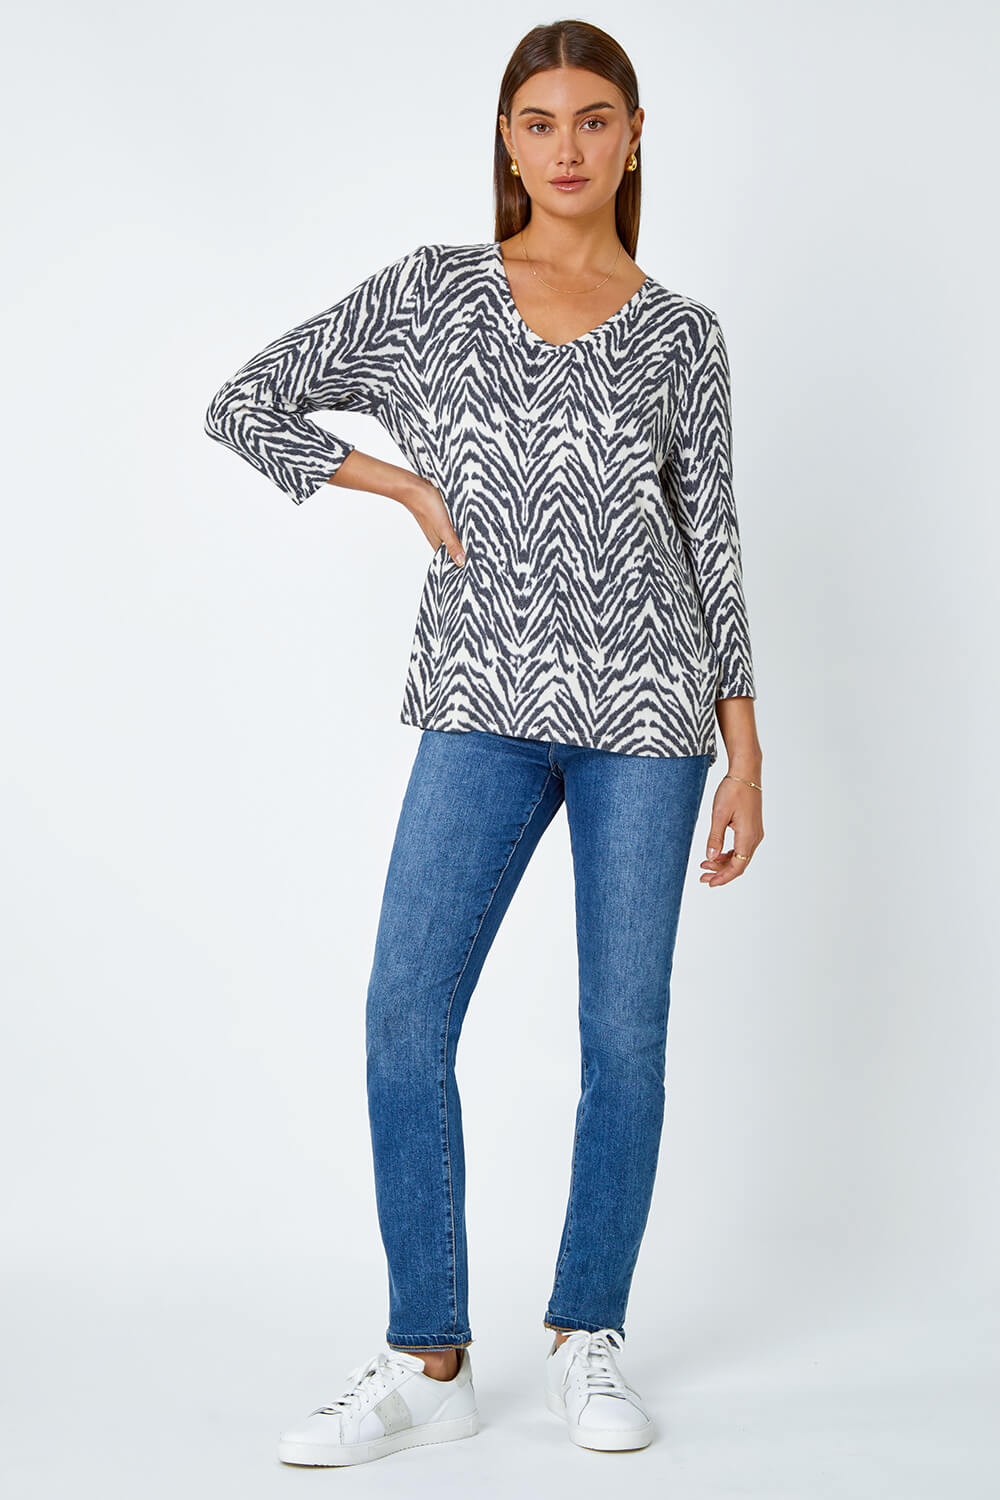 Grey Soft Touch Animal Stretch Top, Image 2 of 5